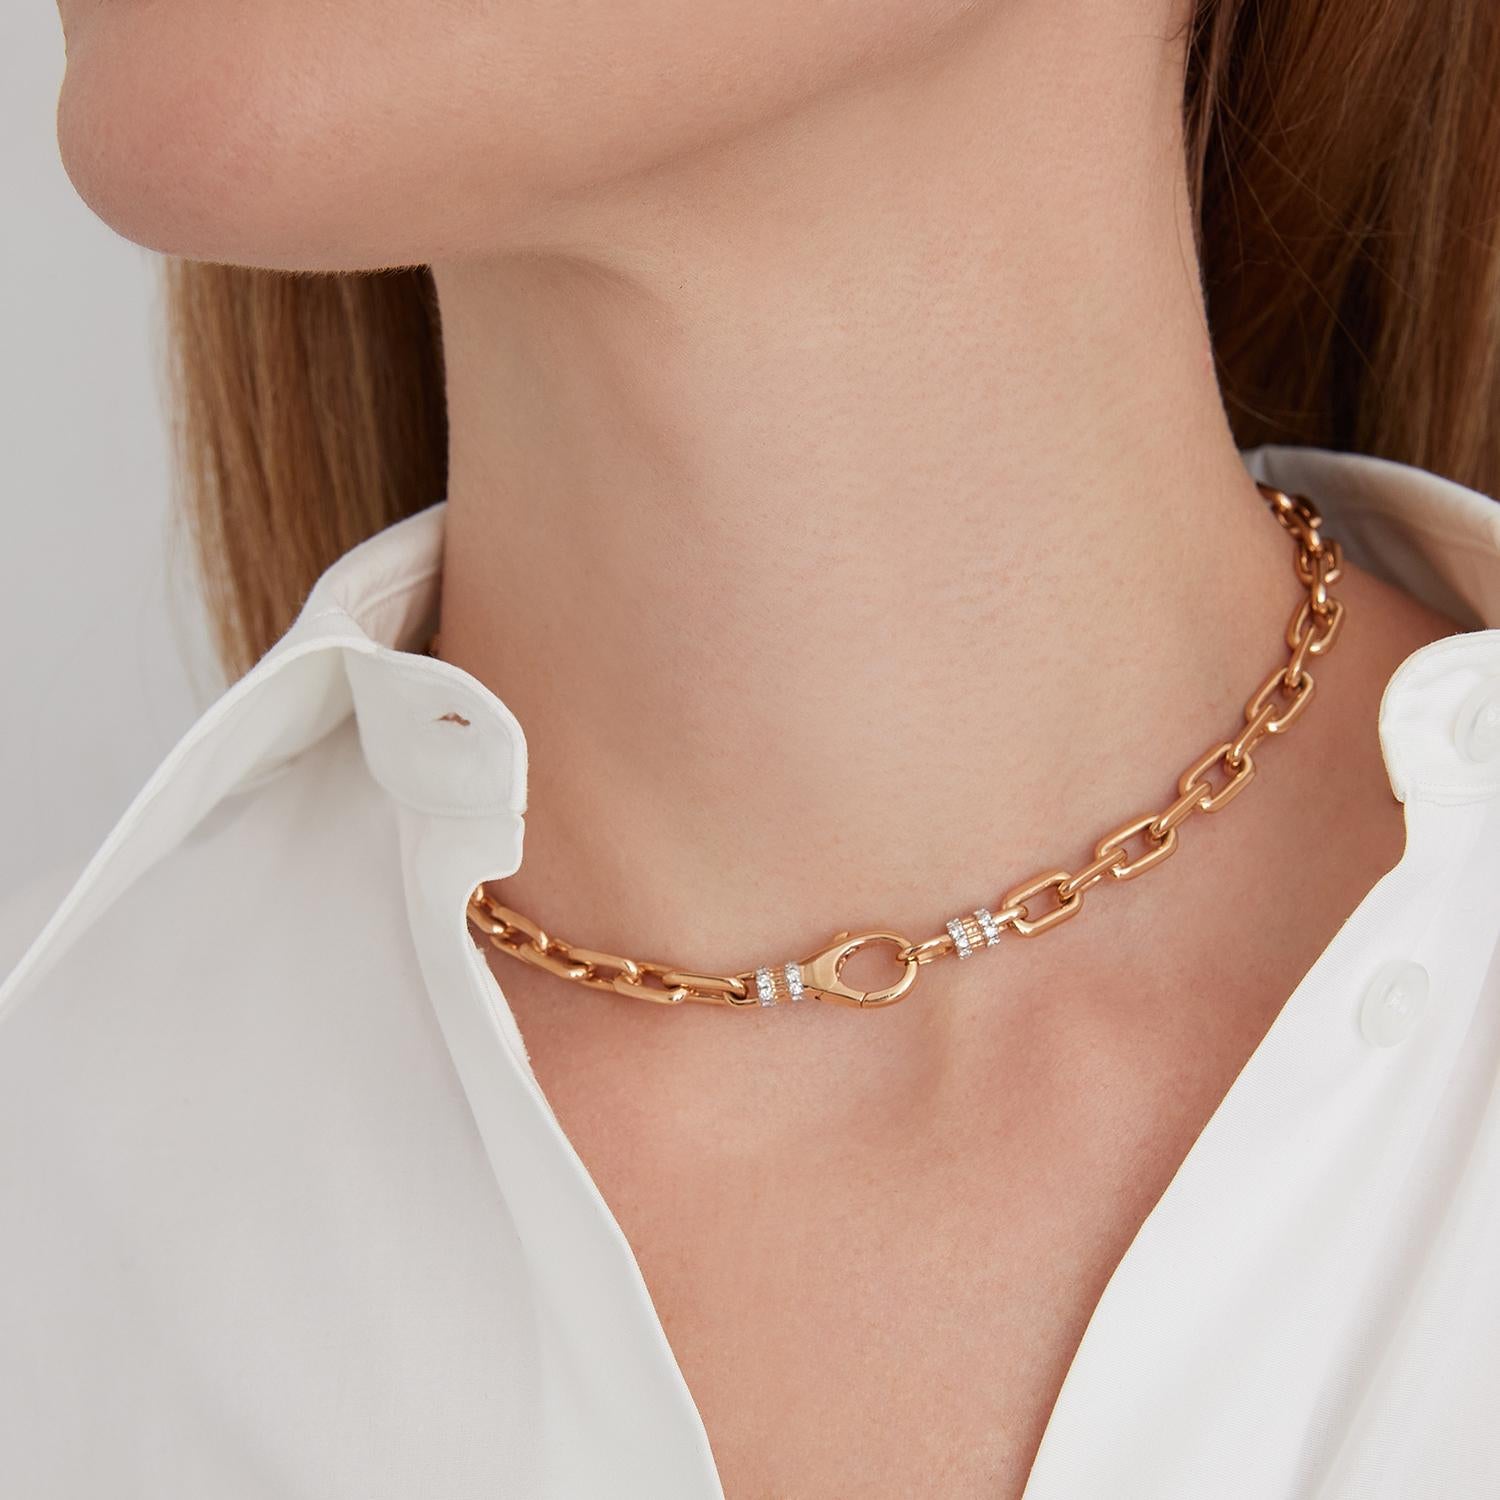 Walters Faith's Clive Collection 18K Rose Gold Chain Link Choker Necklace with Diamond Lobster Clasp. .43 Diamond Carat Weight. Necklace measures 11.5mm W x 15